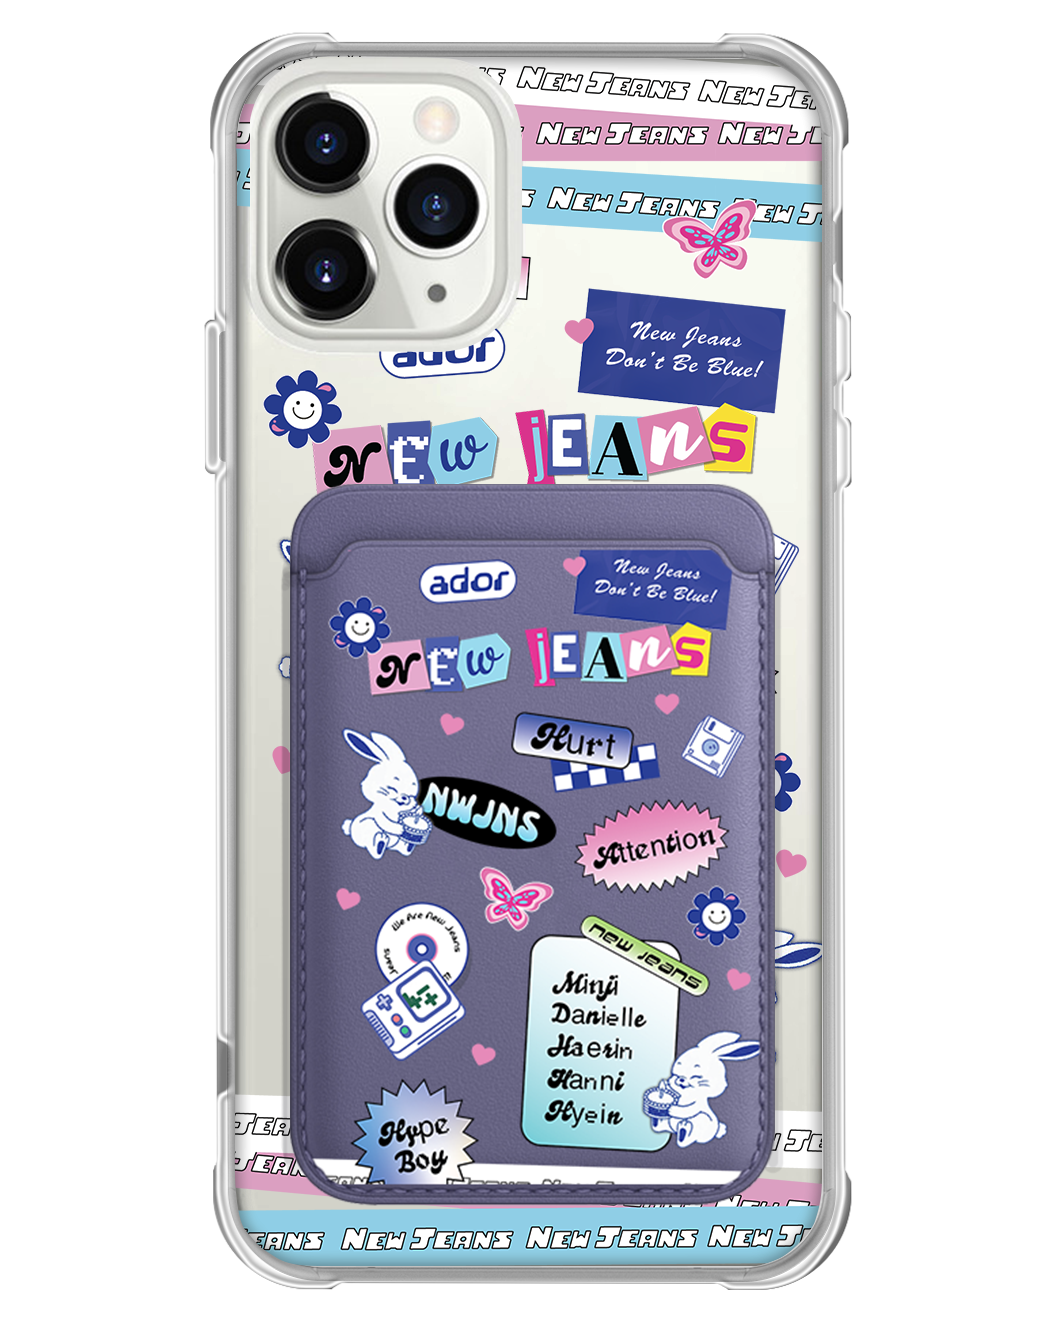 iPhone Magnetic Wallet Case - New Jeans Sticker Pack